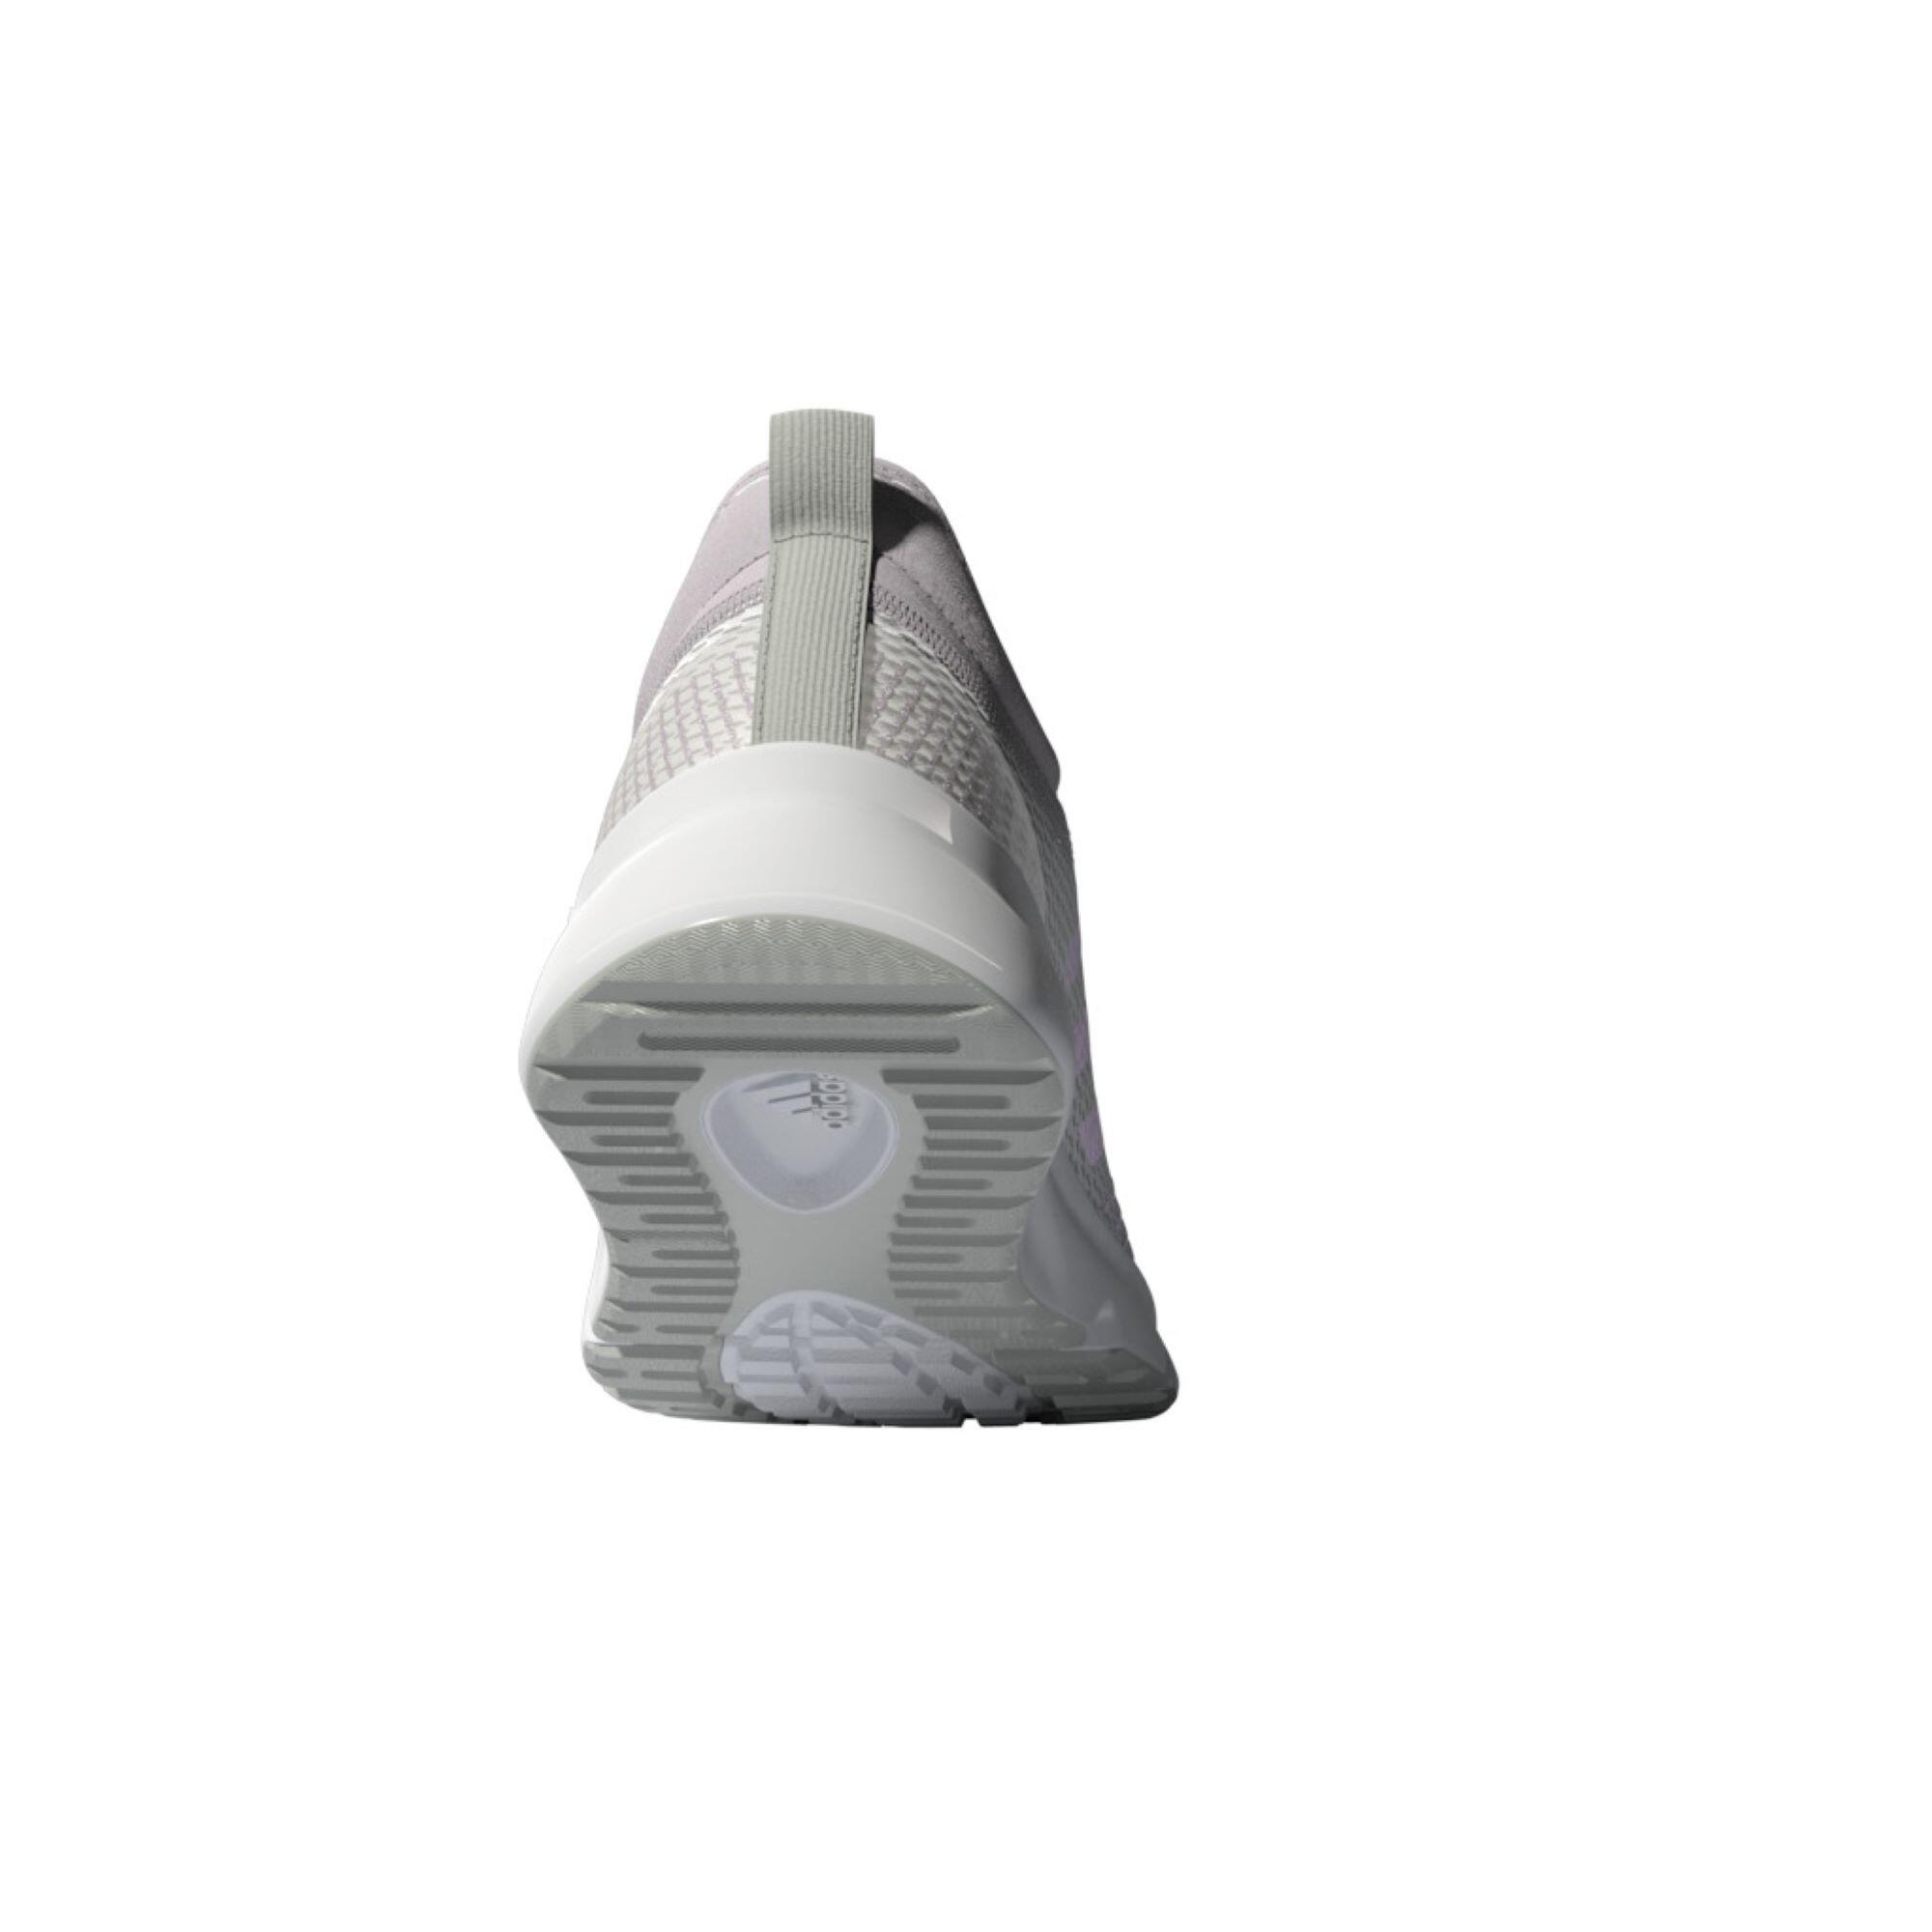 Fitness Shoes Fluidup - White 6/7